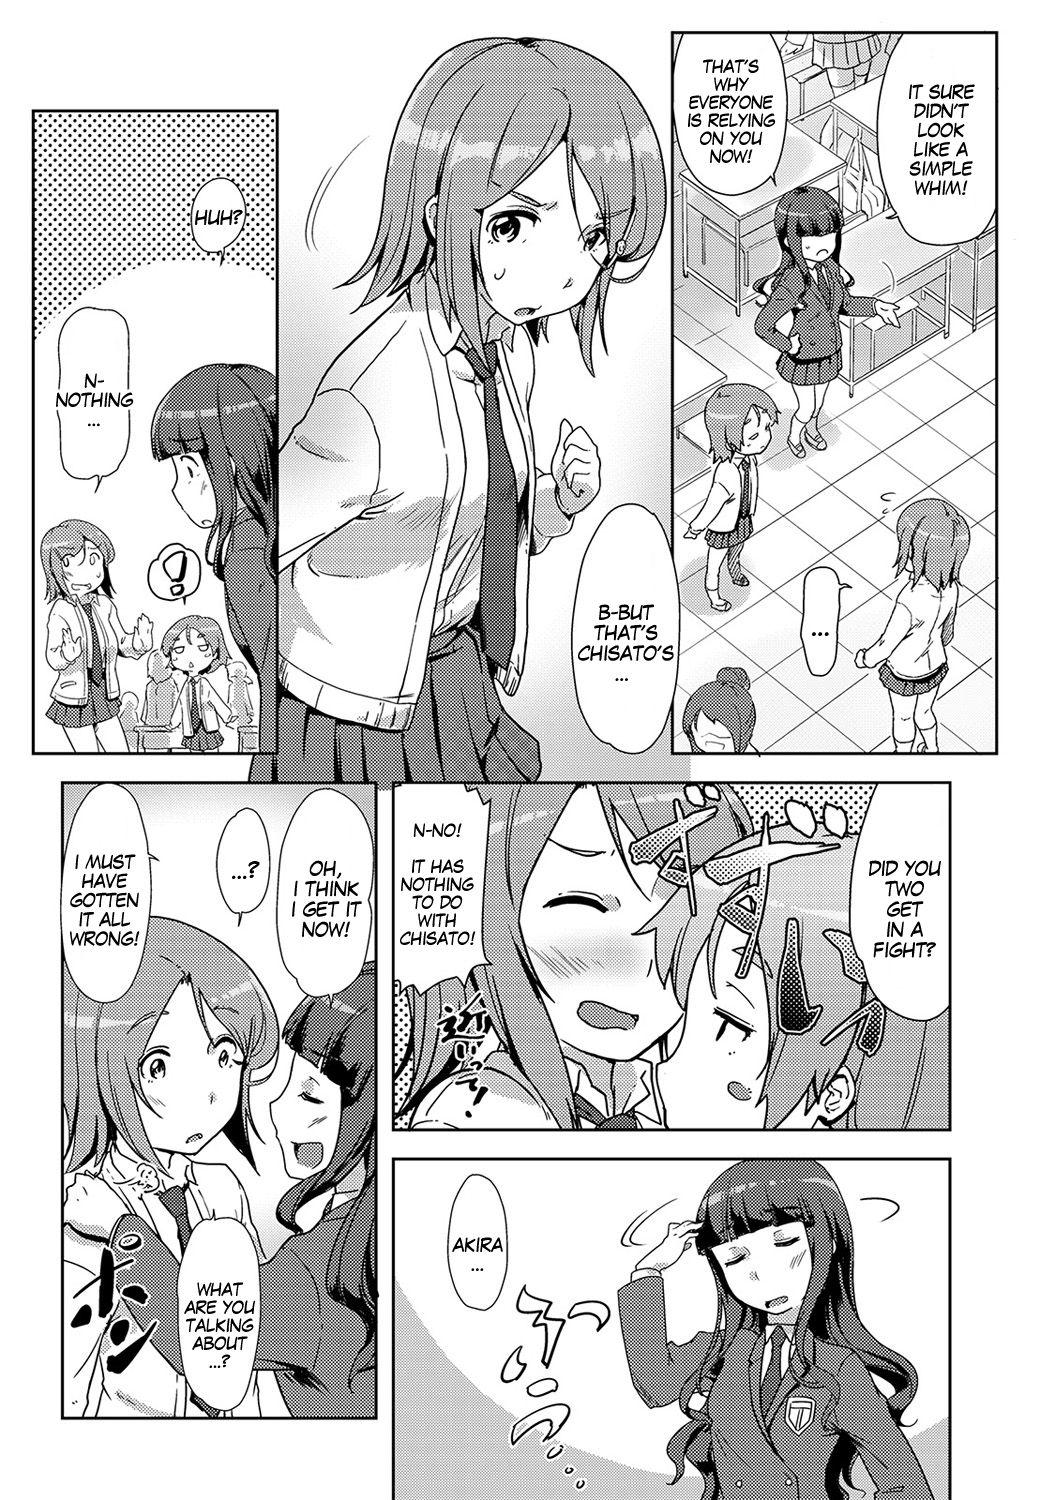 Massive Ecchi Shitara Irekawacchatta!? | We Switched Our Bodies After Having Sex!? Ch. 5 Crazy - Page 6